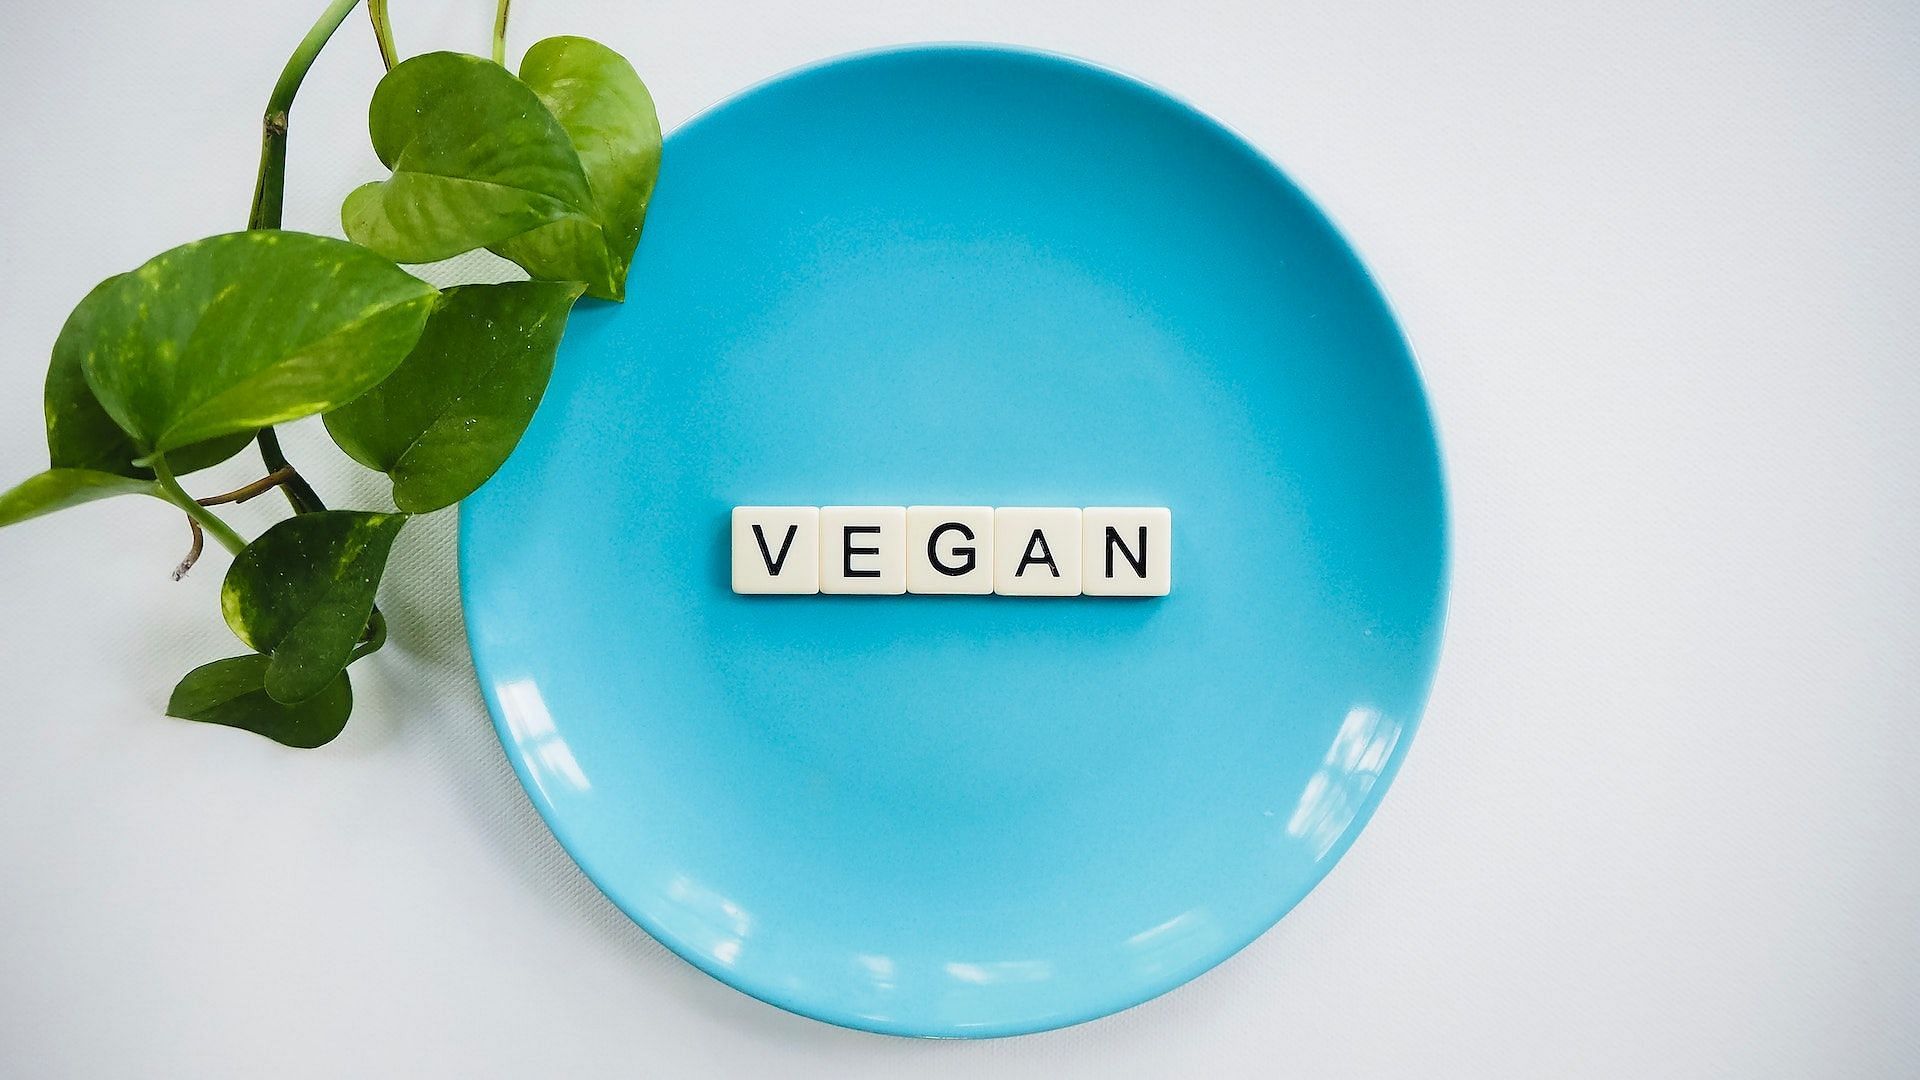 There are several plant-based sources of calcium for vegans. (Photo via Pexels/Vegan Liftz)